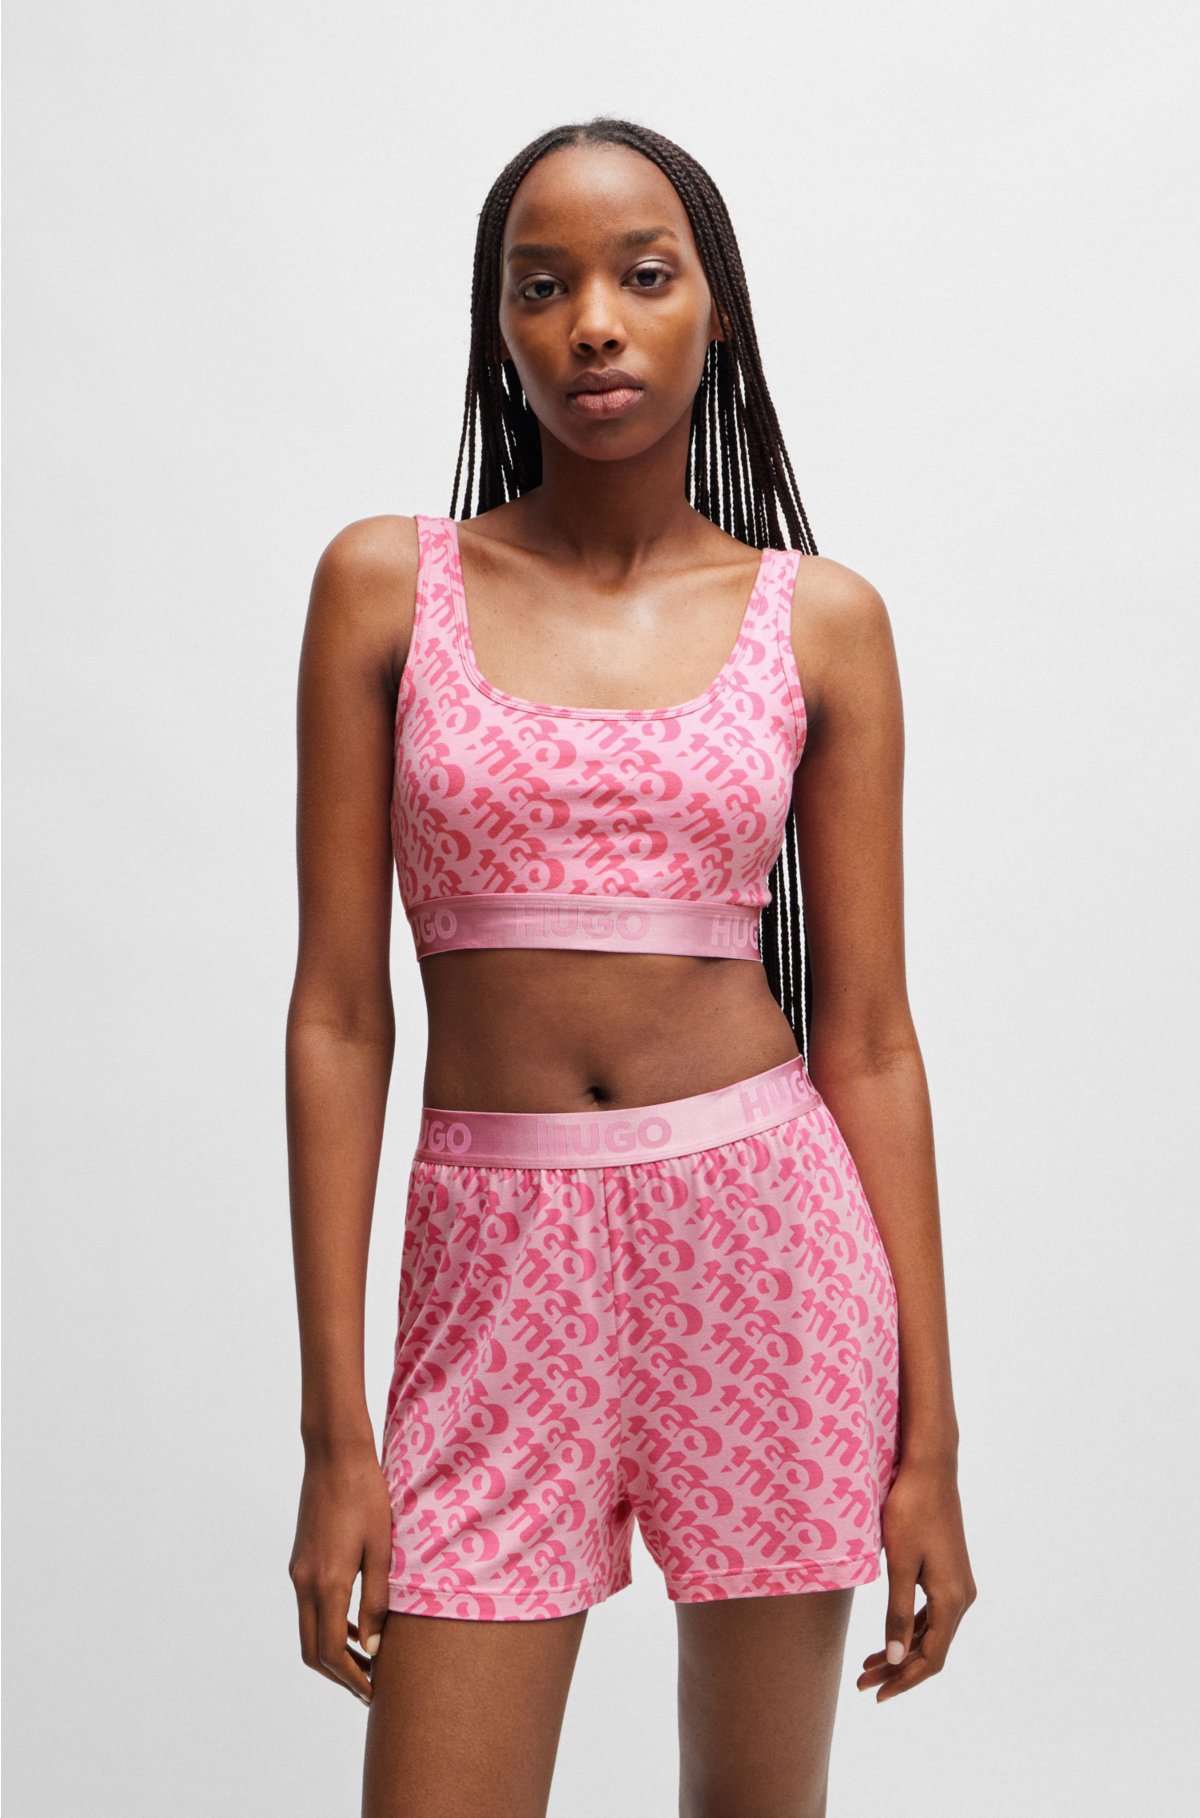 Stretch-cotton bralette with repeat logos, Pink Patterned